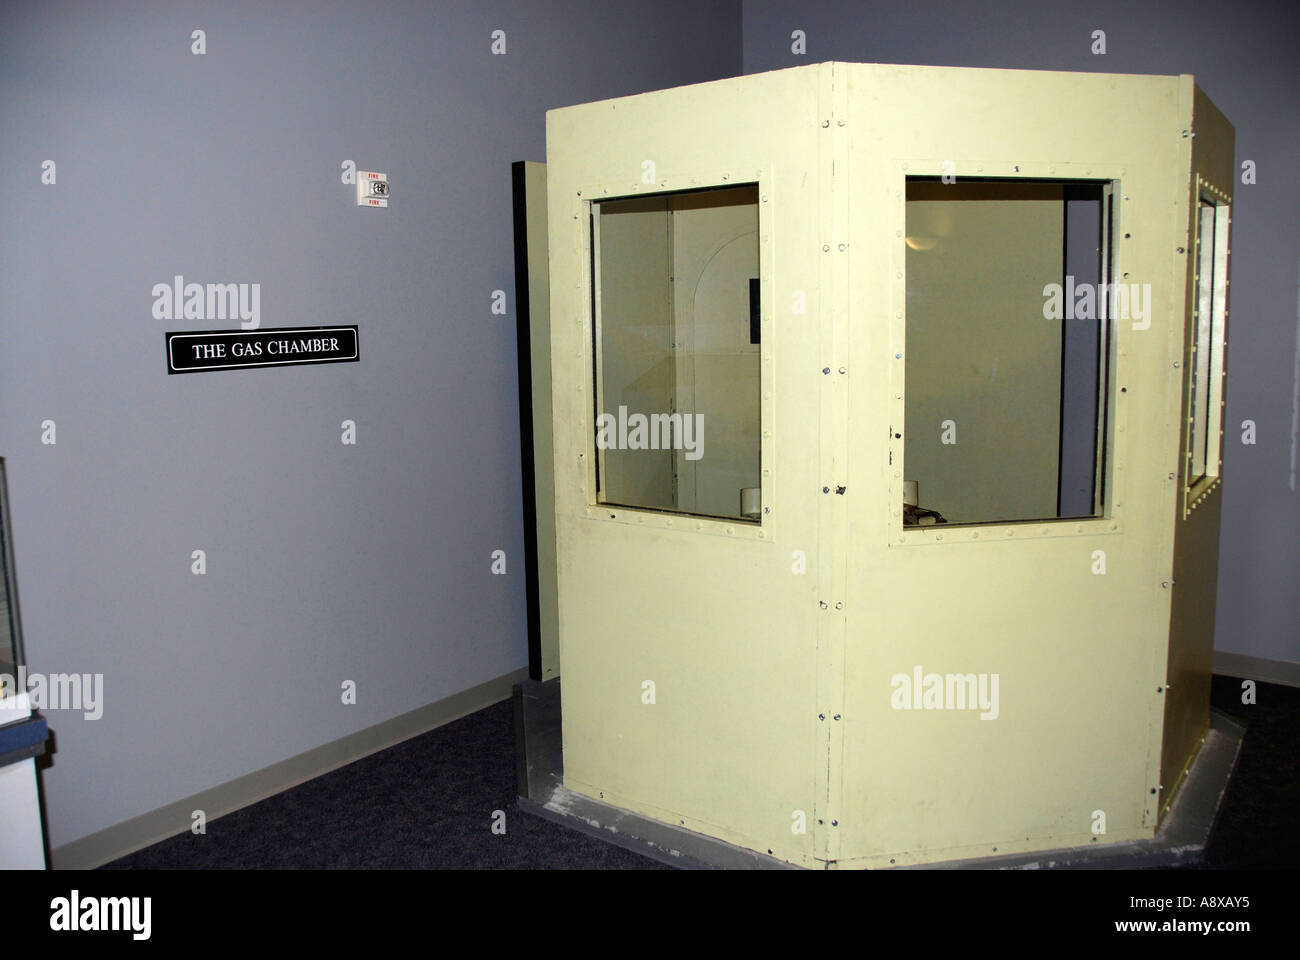 Gas chamber at the American Police Hall of Fame Titusville Florida FL Stock Photo